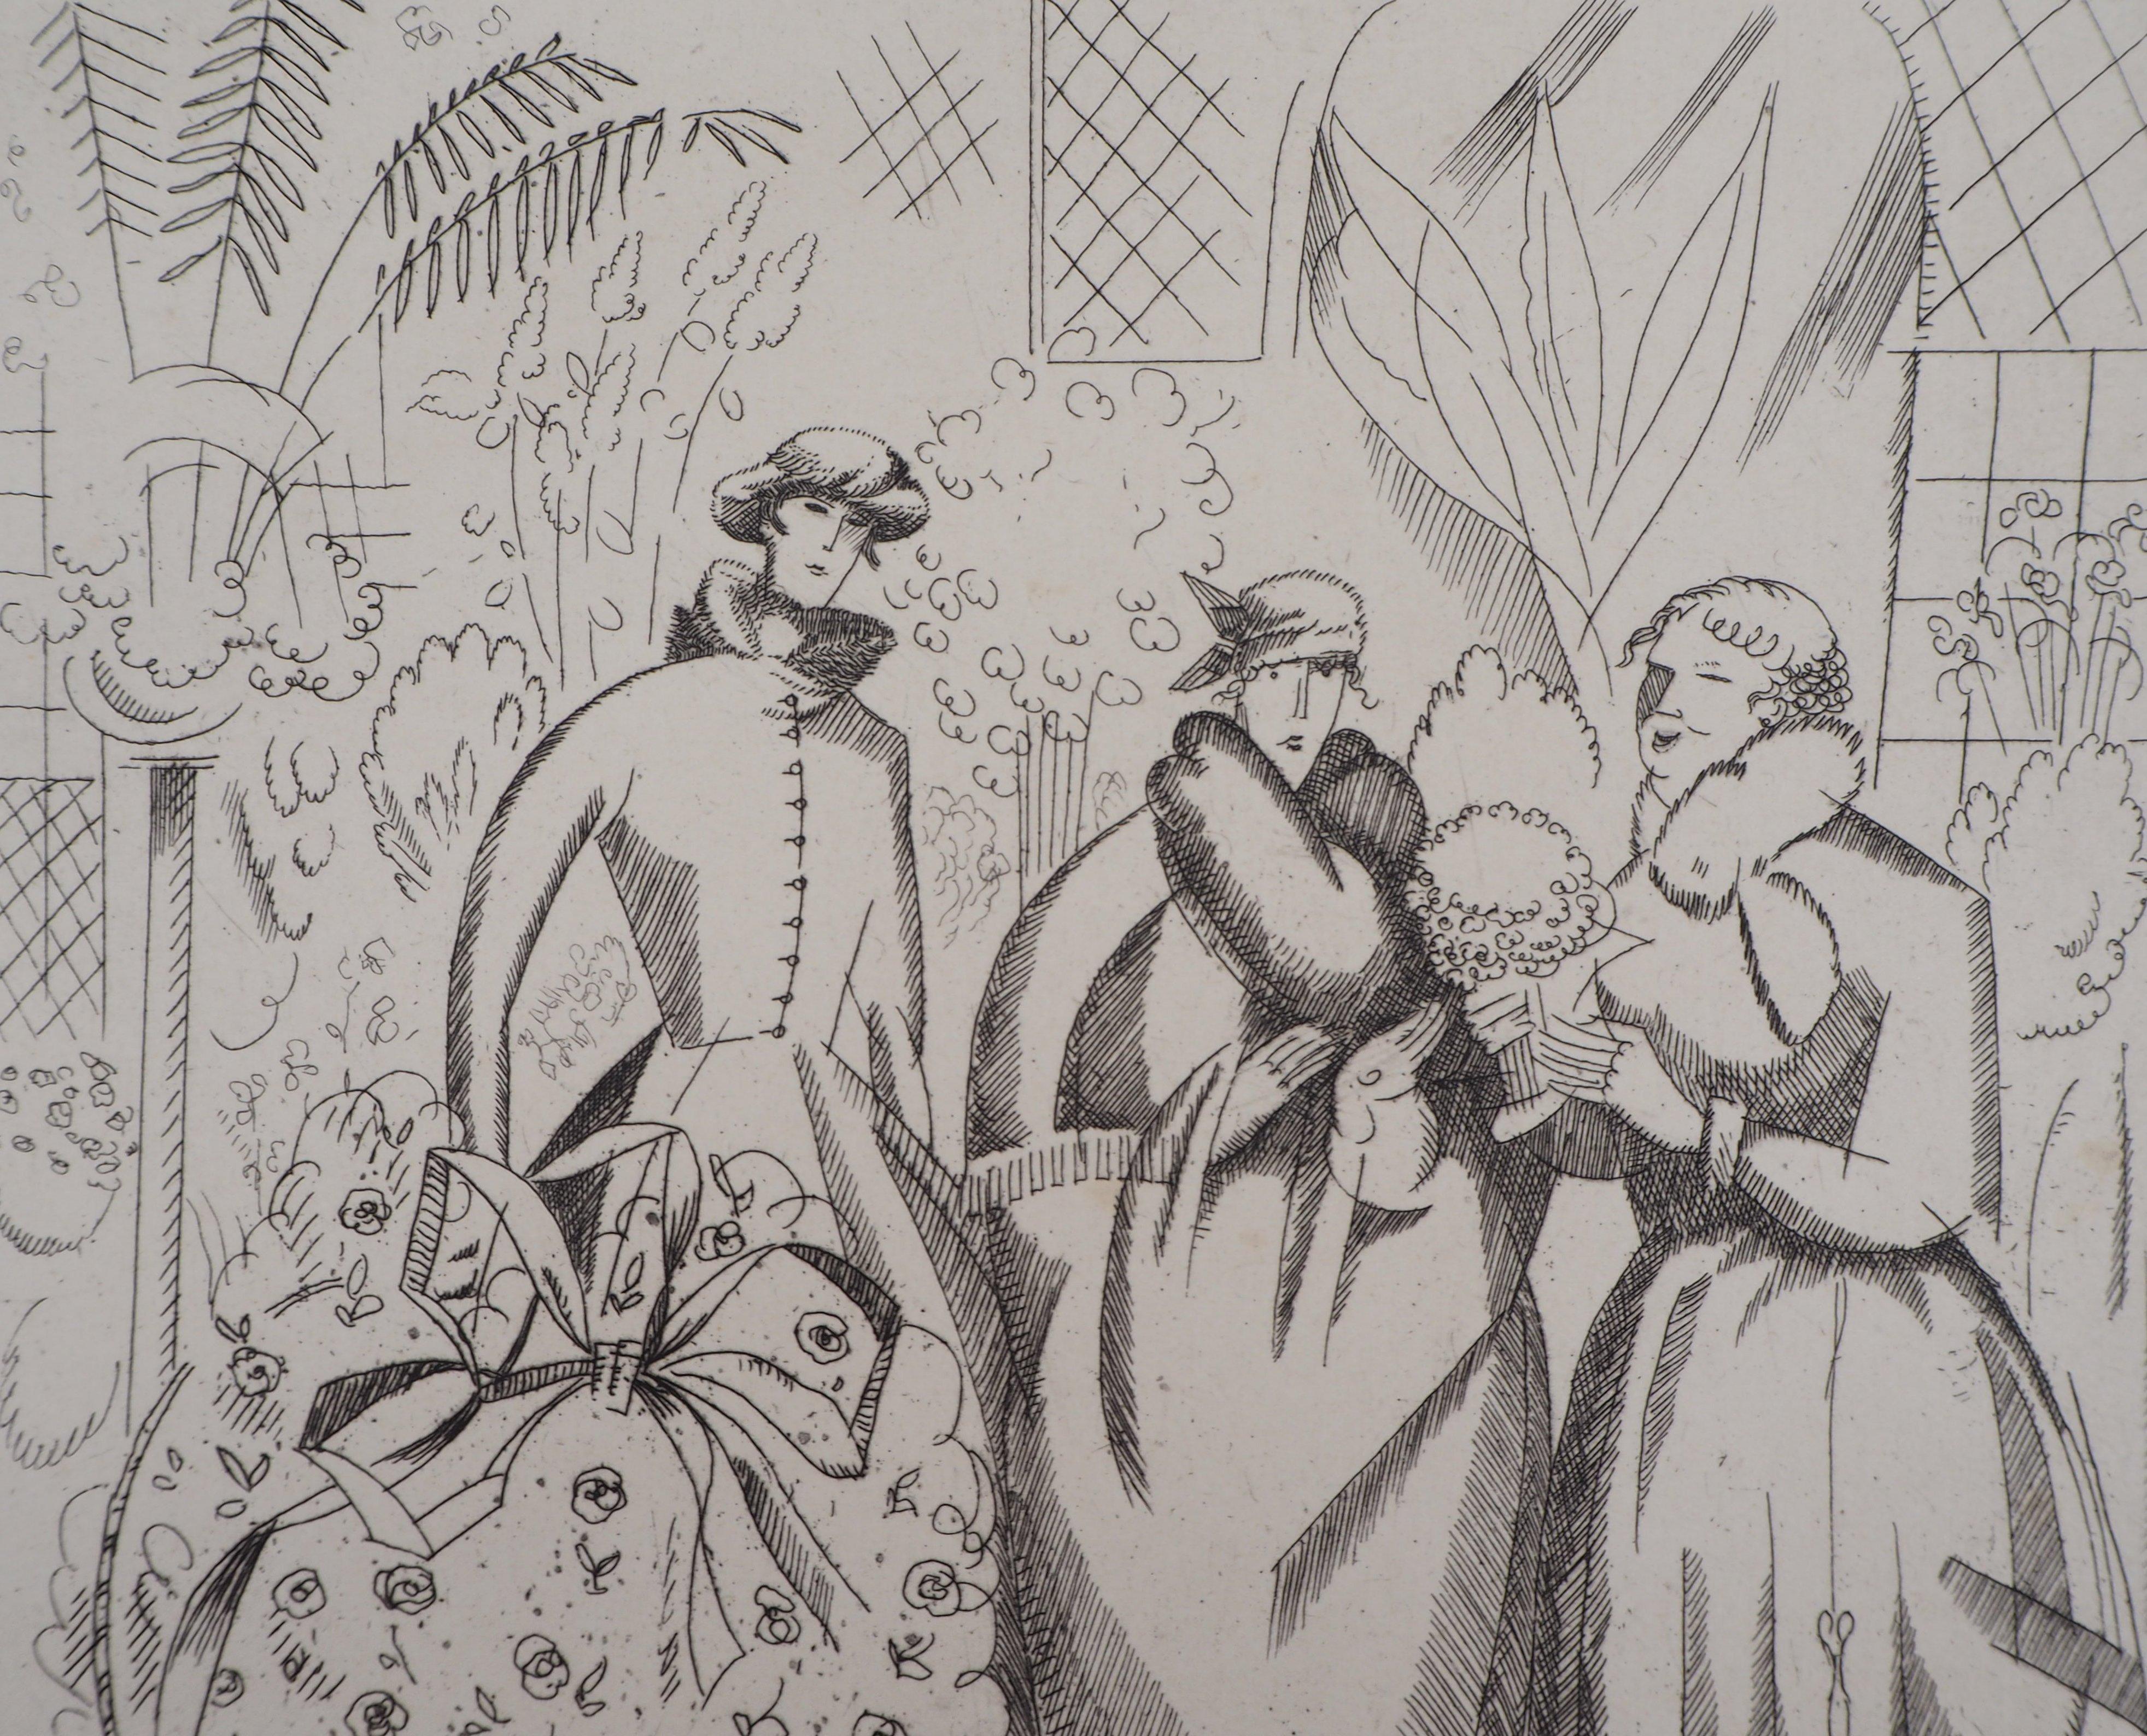 At the Florist - Original Handsigned Etching - Gray Figurative Print by Jean-Emile Laboureur